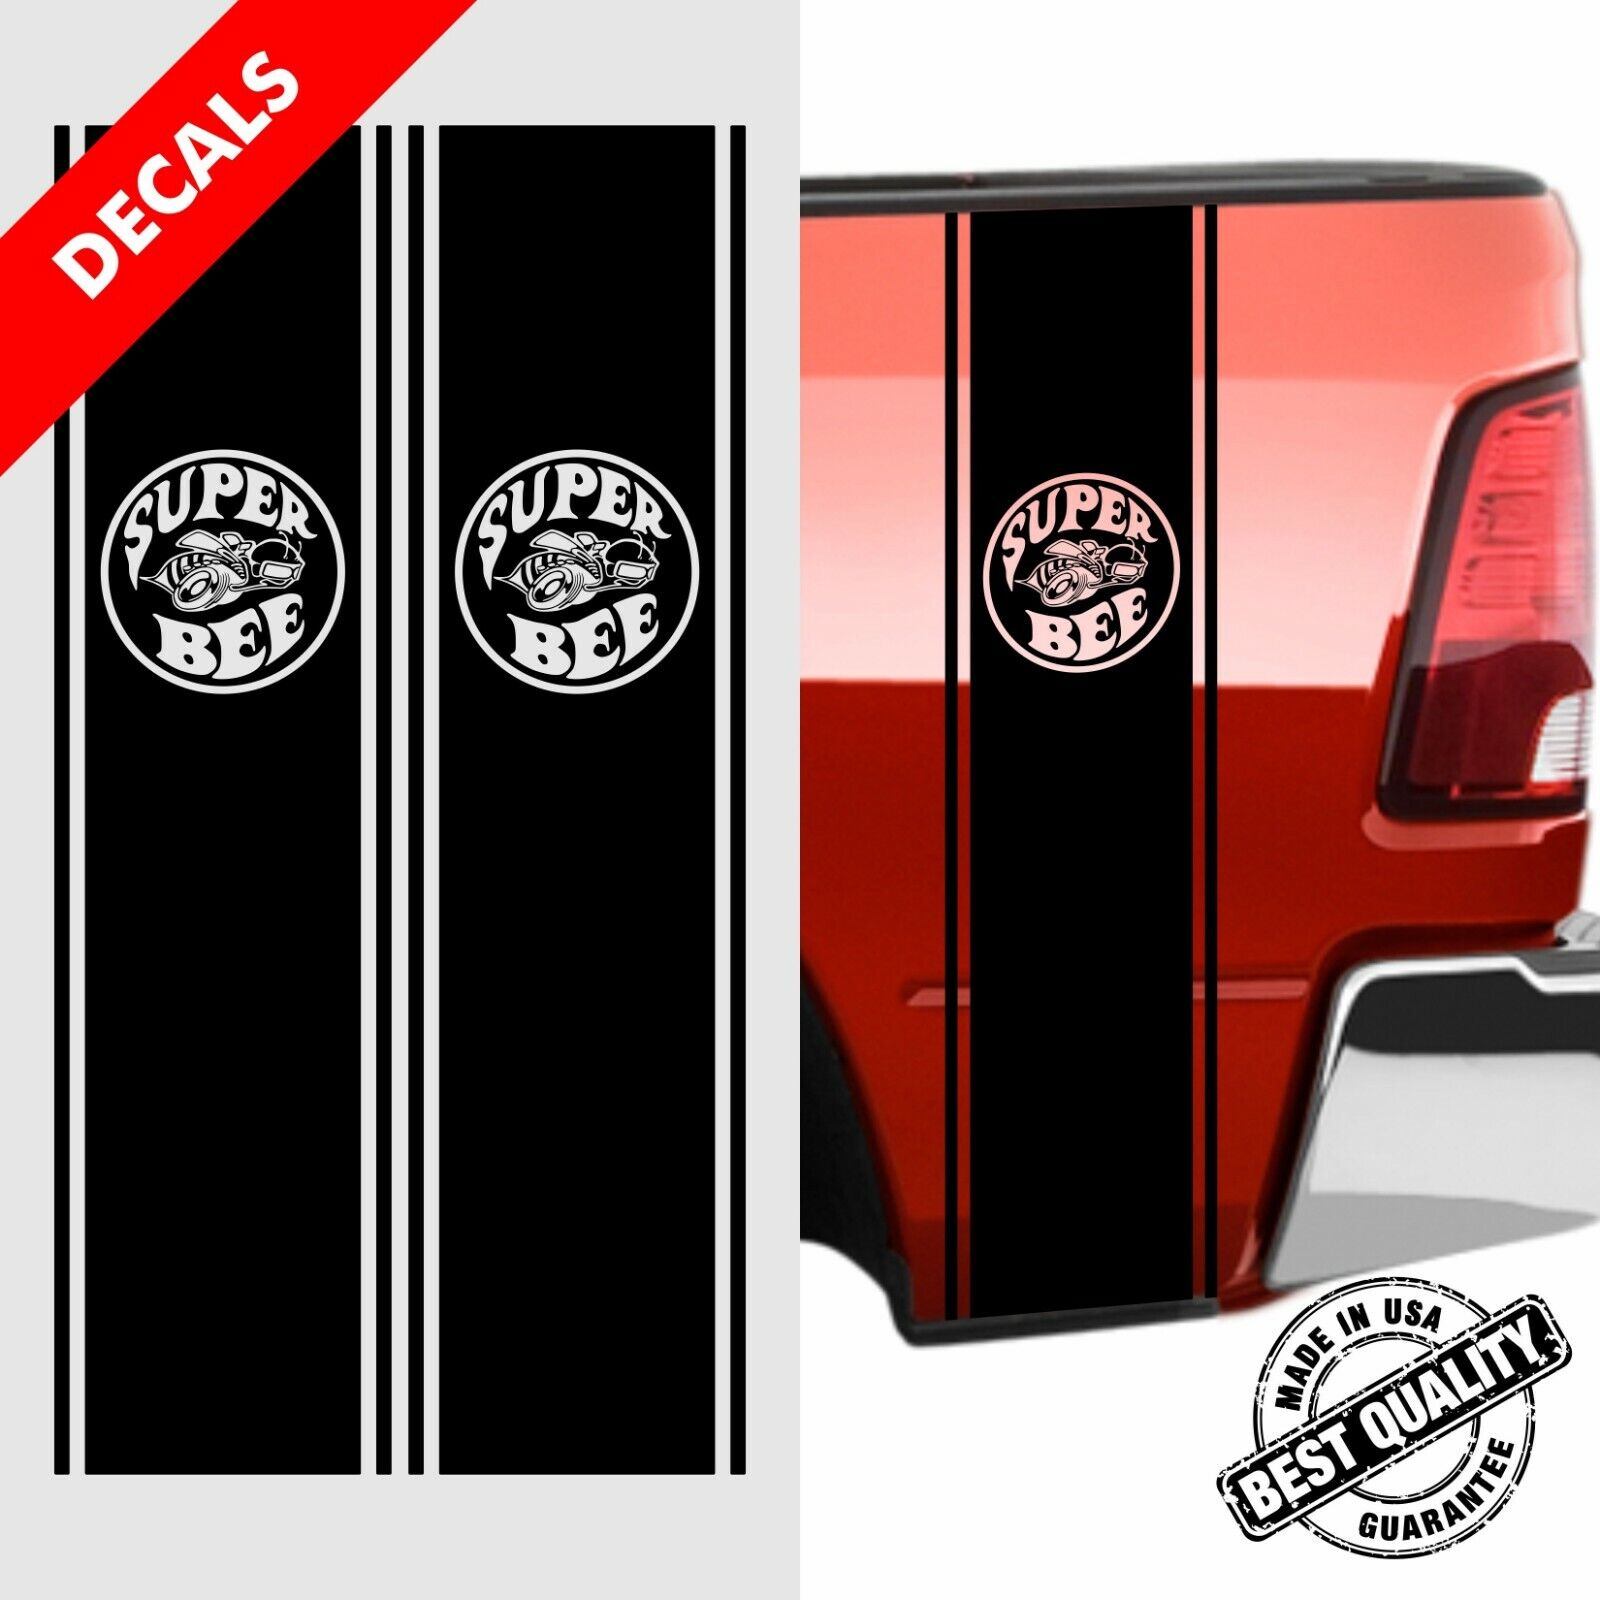 Rear Bed Truck Decals Stripes SUPER BEE Kit |20